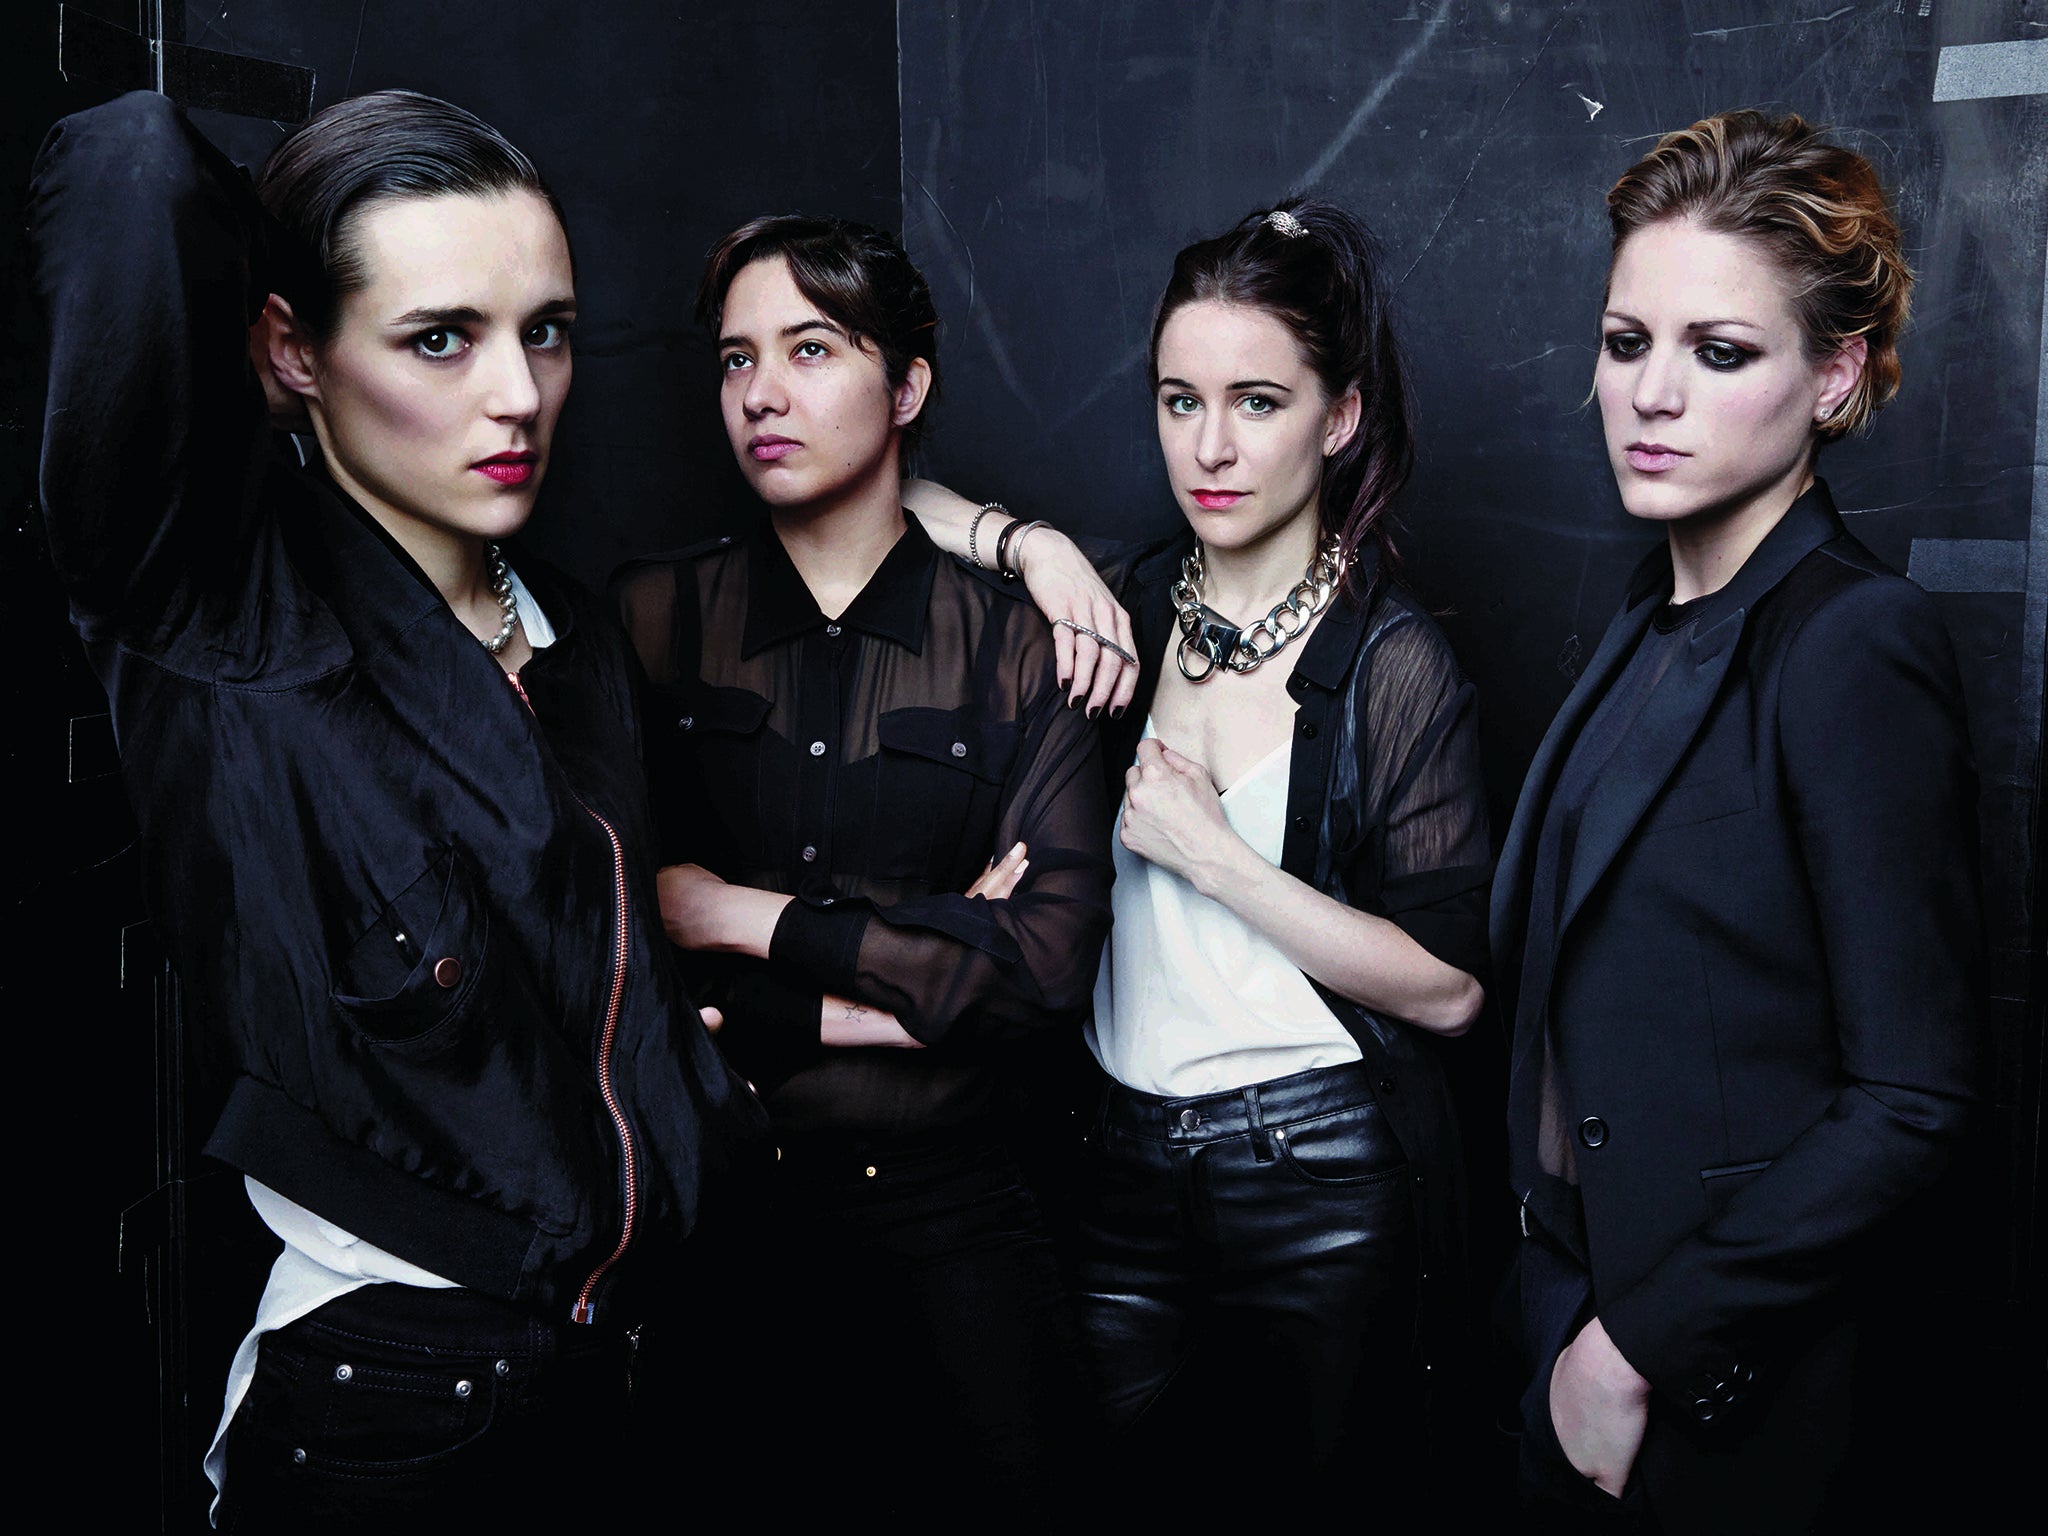 Savages, who provided a healthy dose of intense, crowd-pleasing post-punk